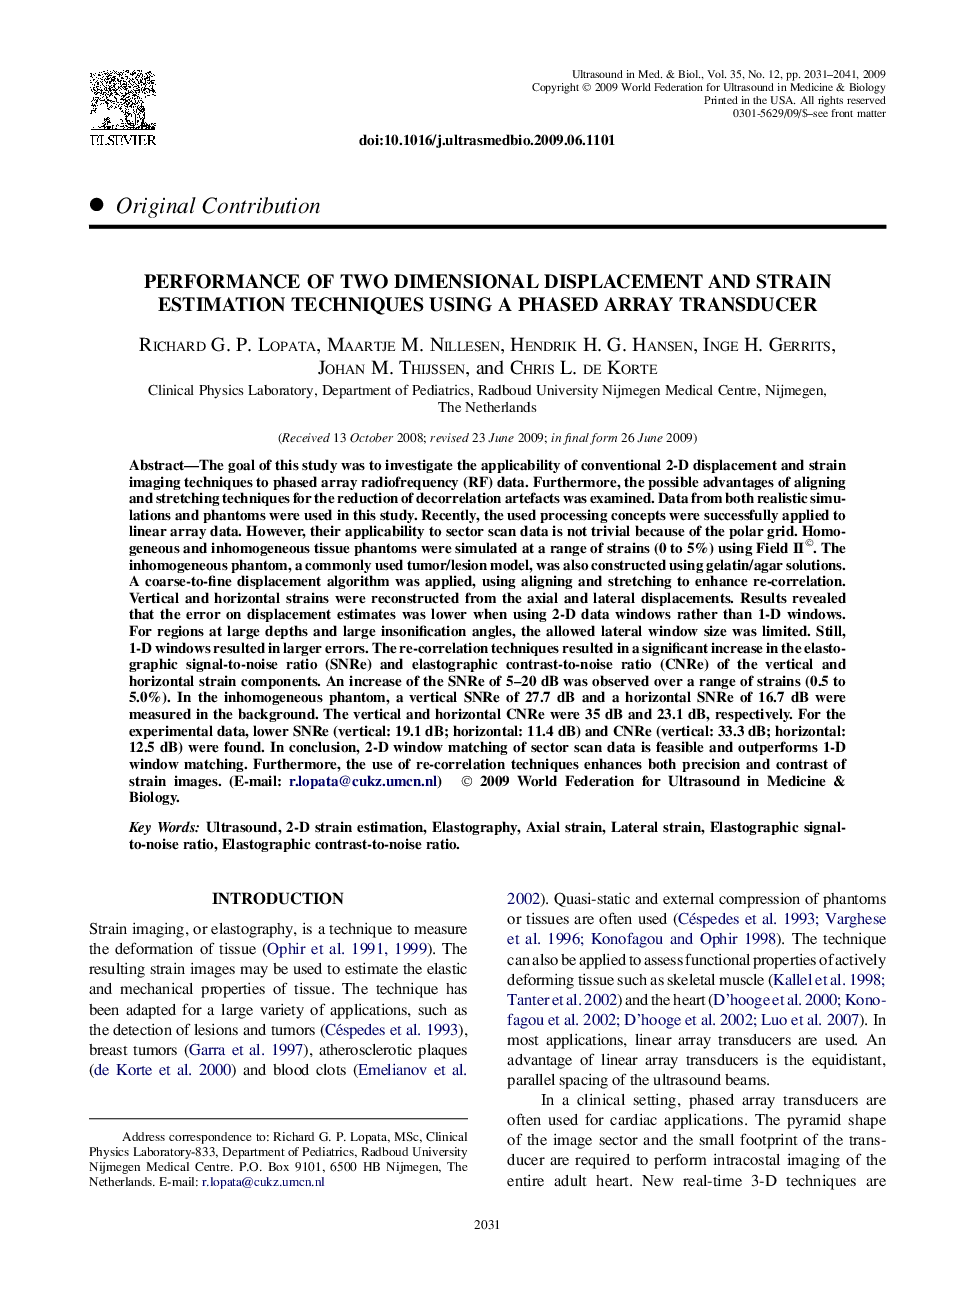 Performance of Two Dimensional Displacement and Strain Estimation Techniques Using a Phased Array Transducer